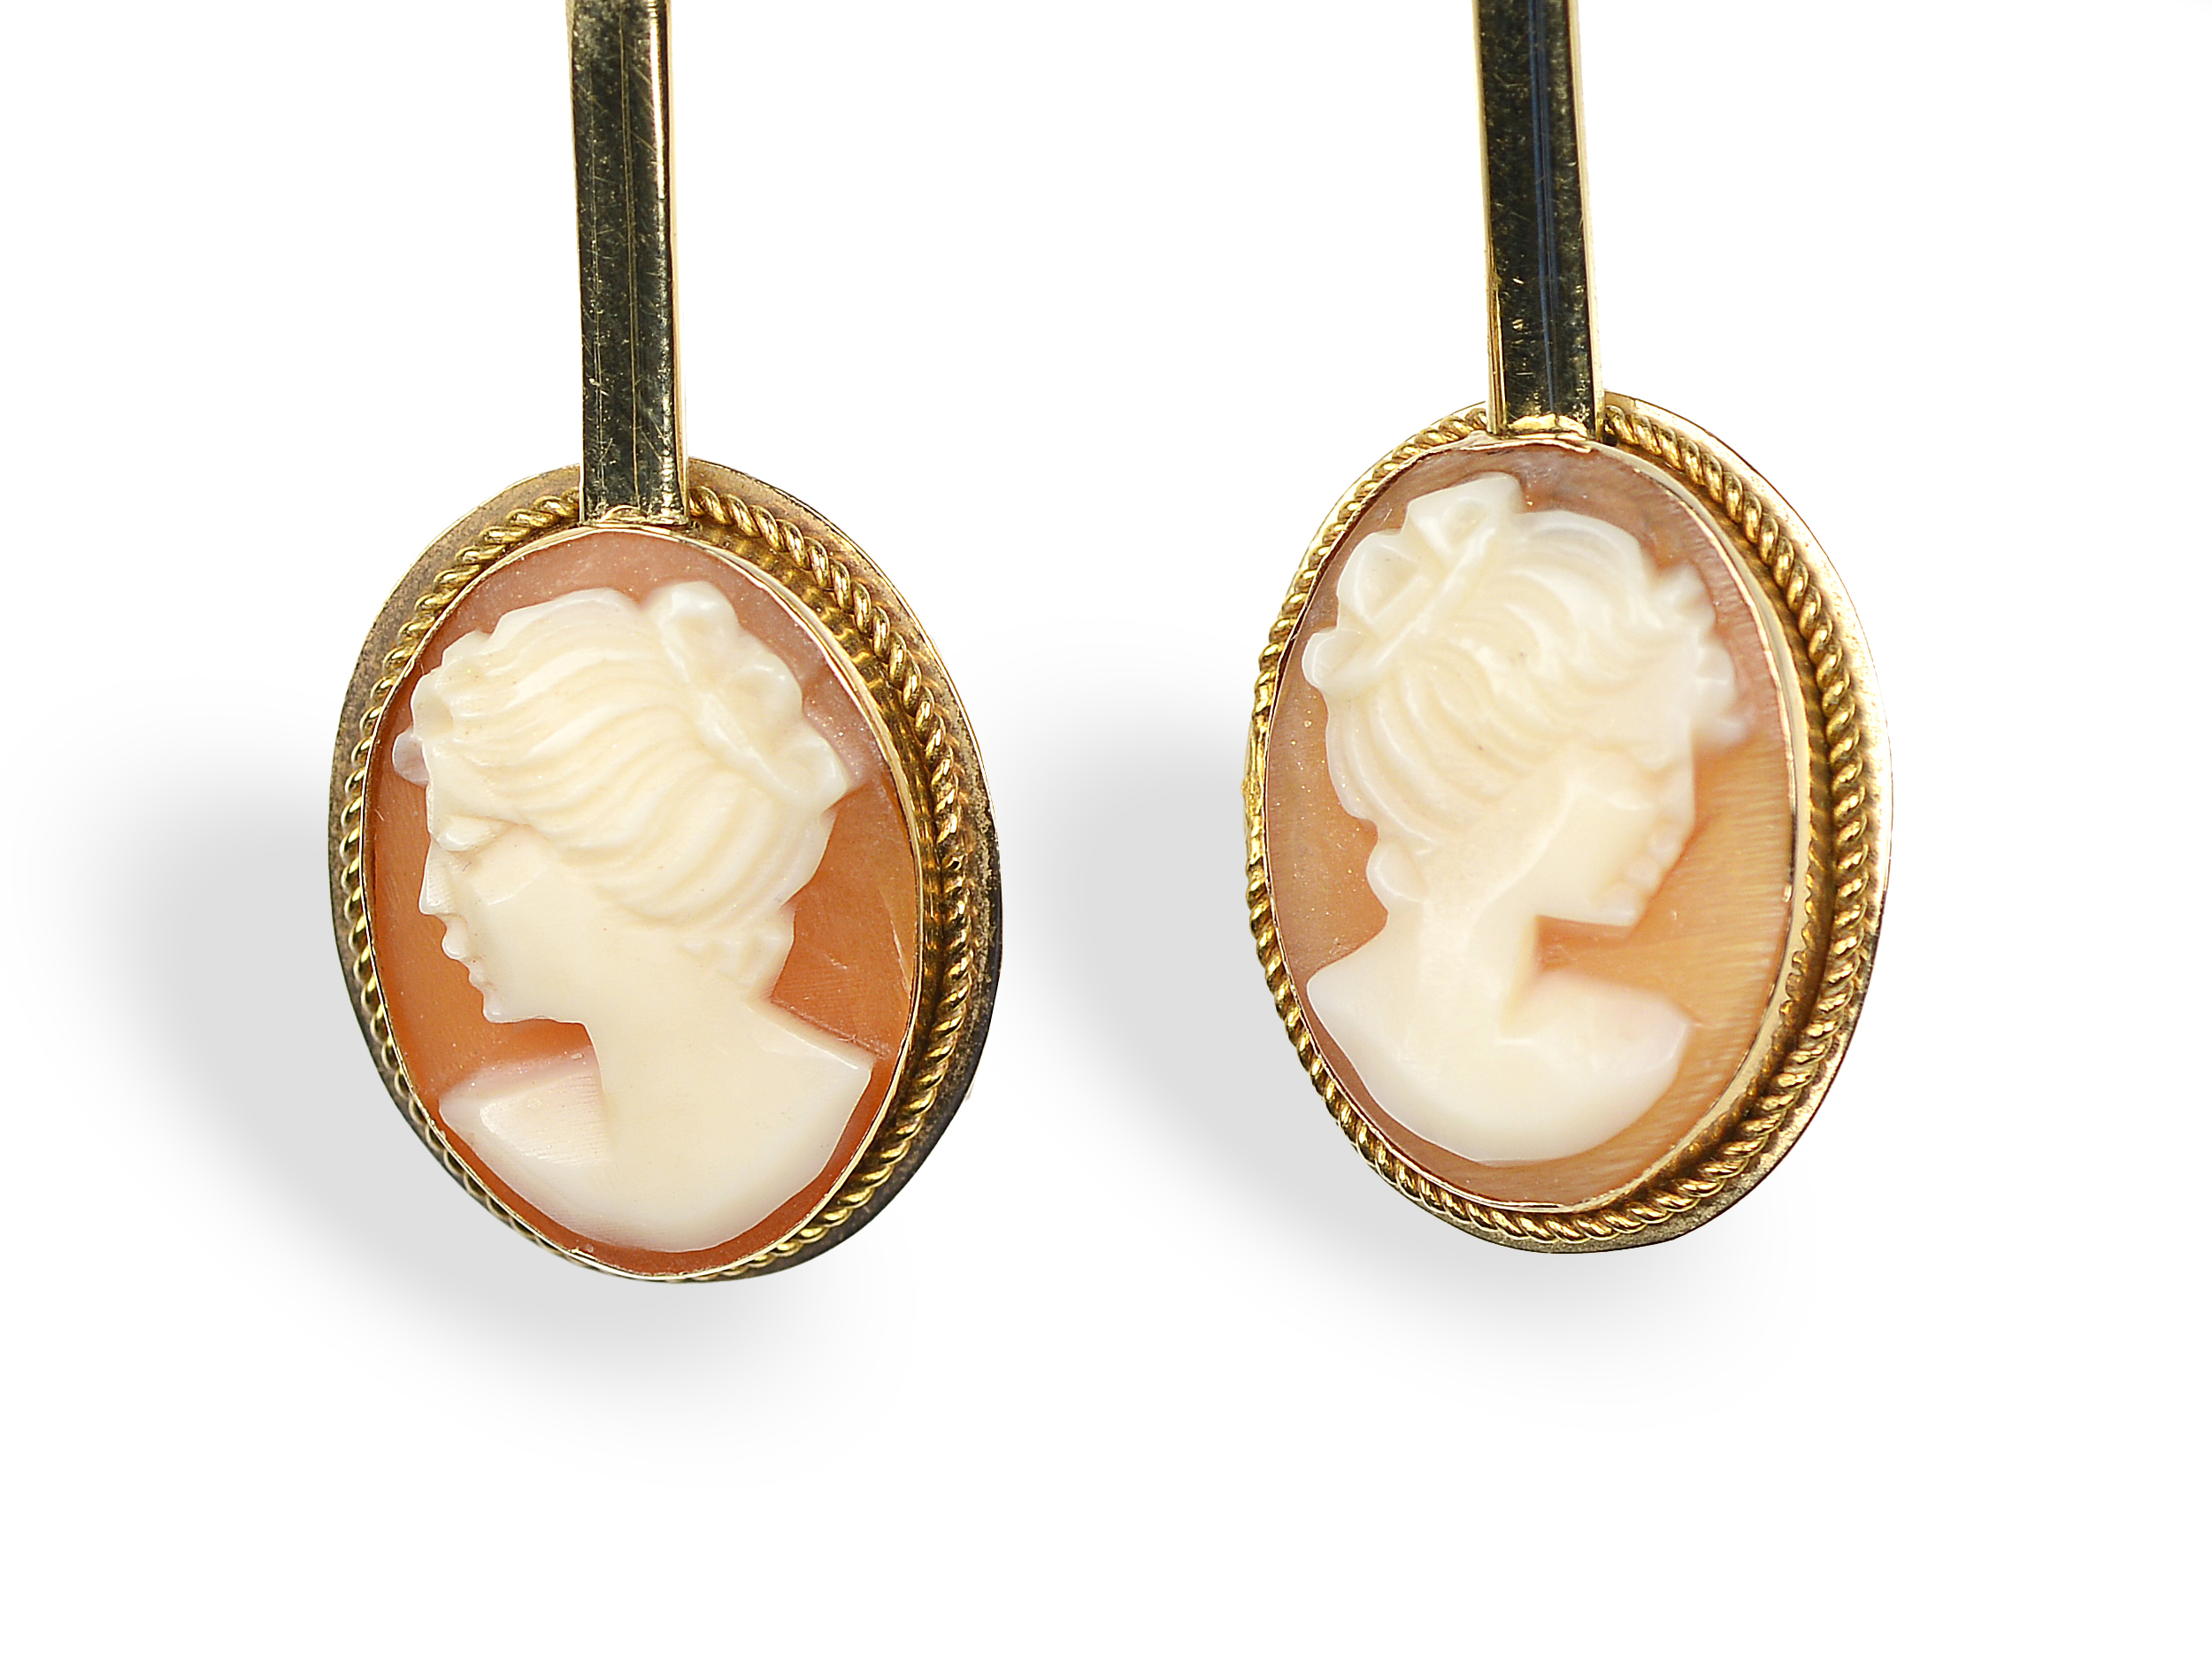 Set: Pair of earrings & ring with shell cameo - Image 3 of 3